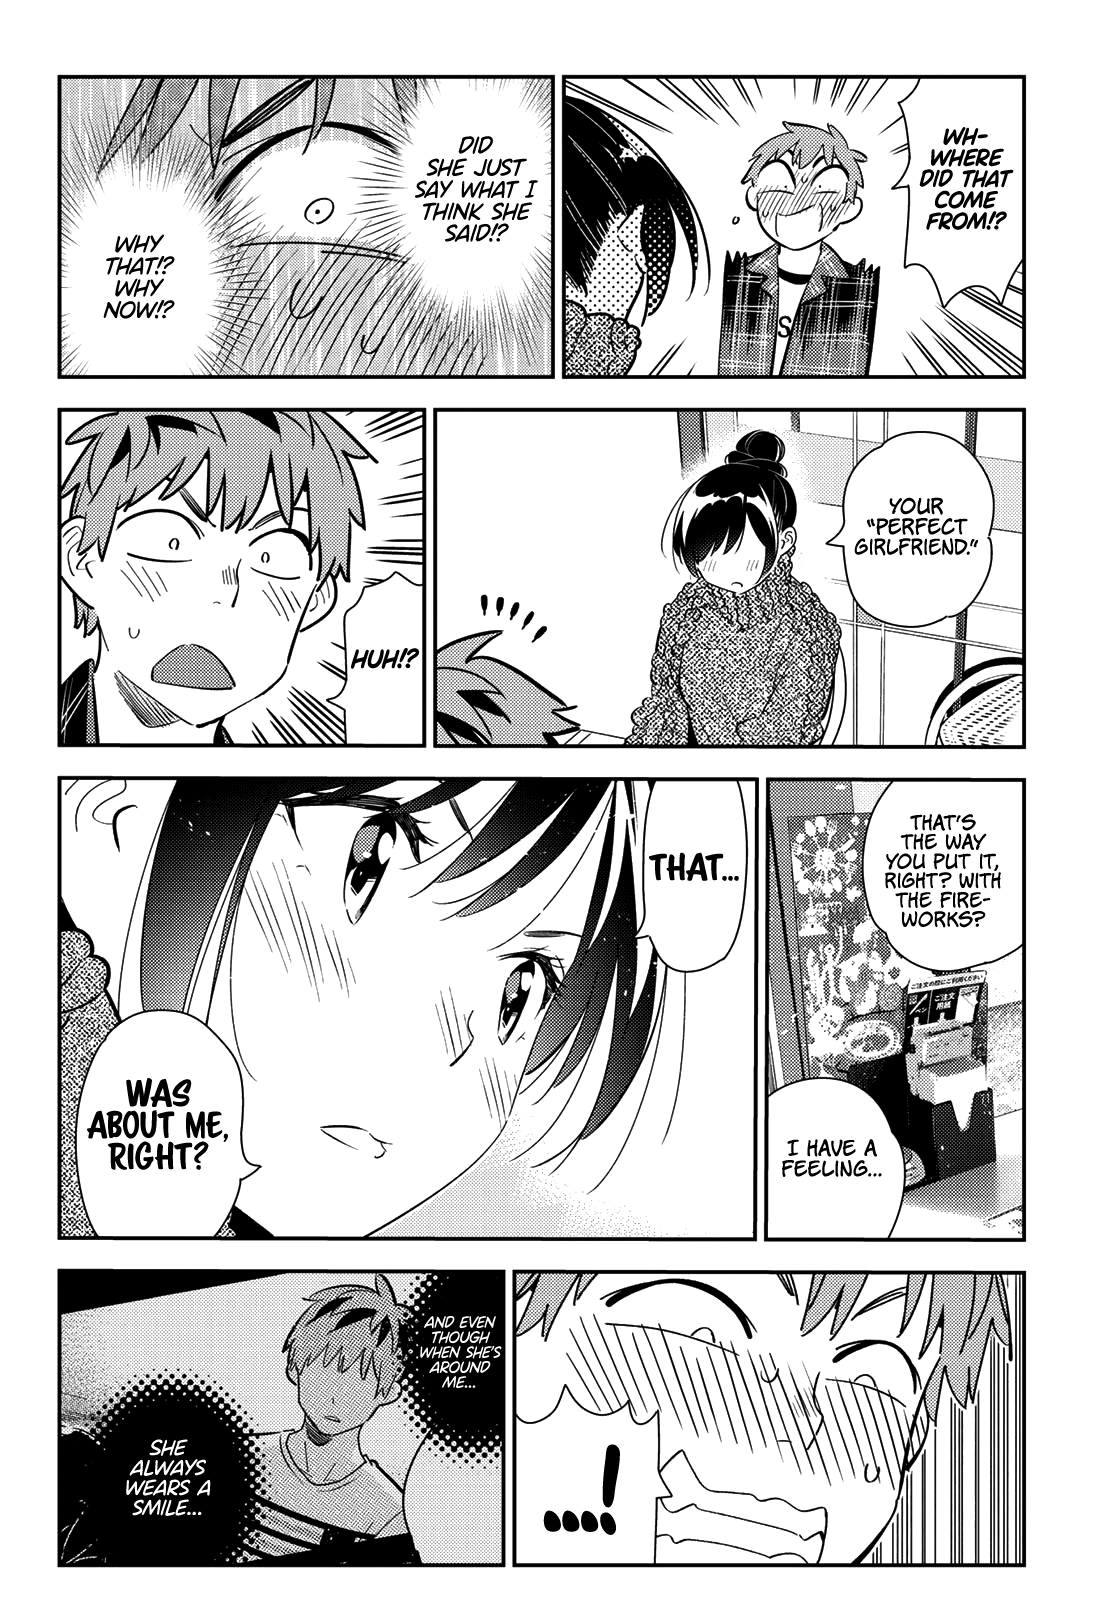 Rent A GirlFriend, Chapter 173 The Girlfriend And The Confession (Part 2) image 017